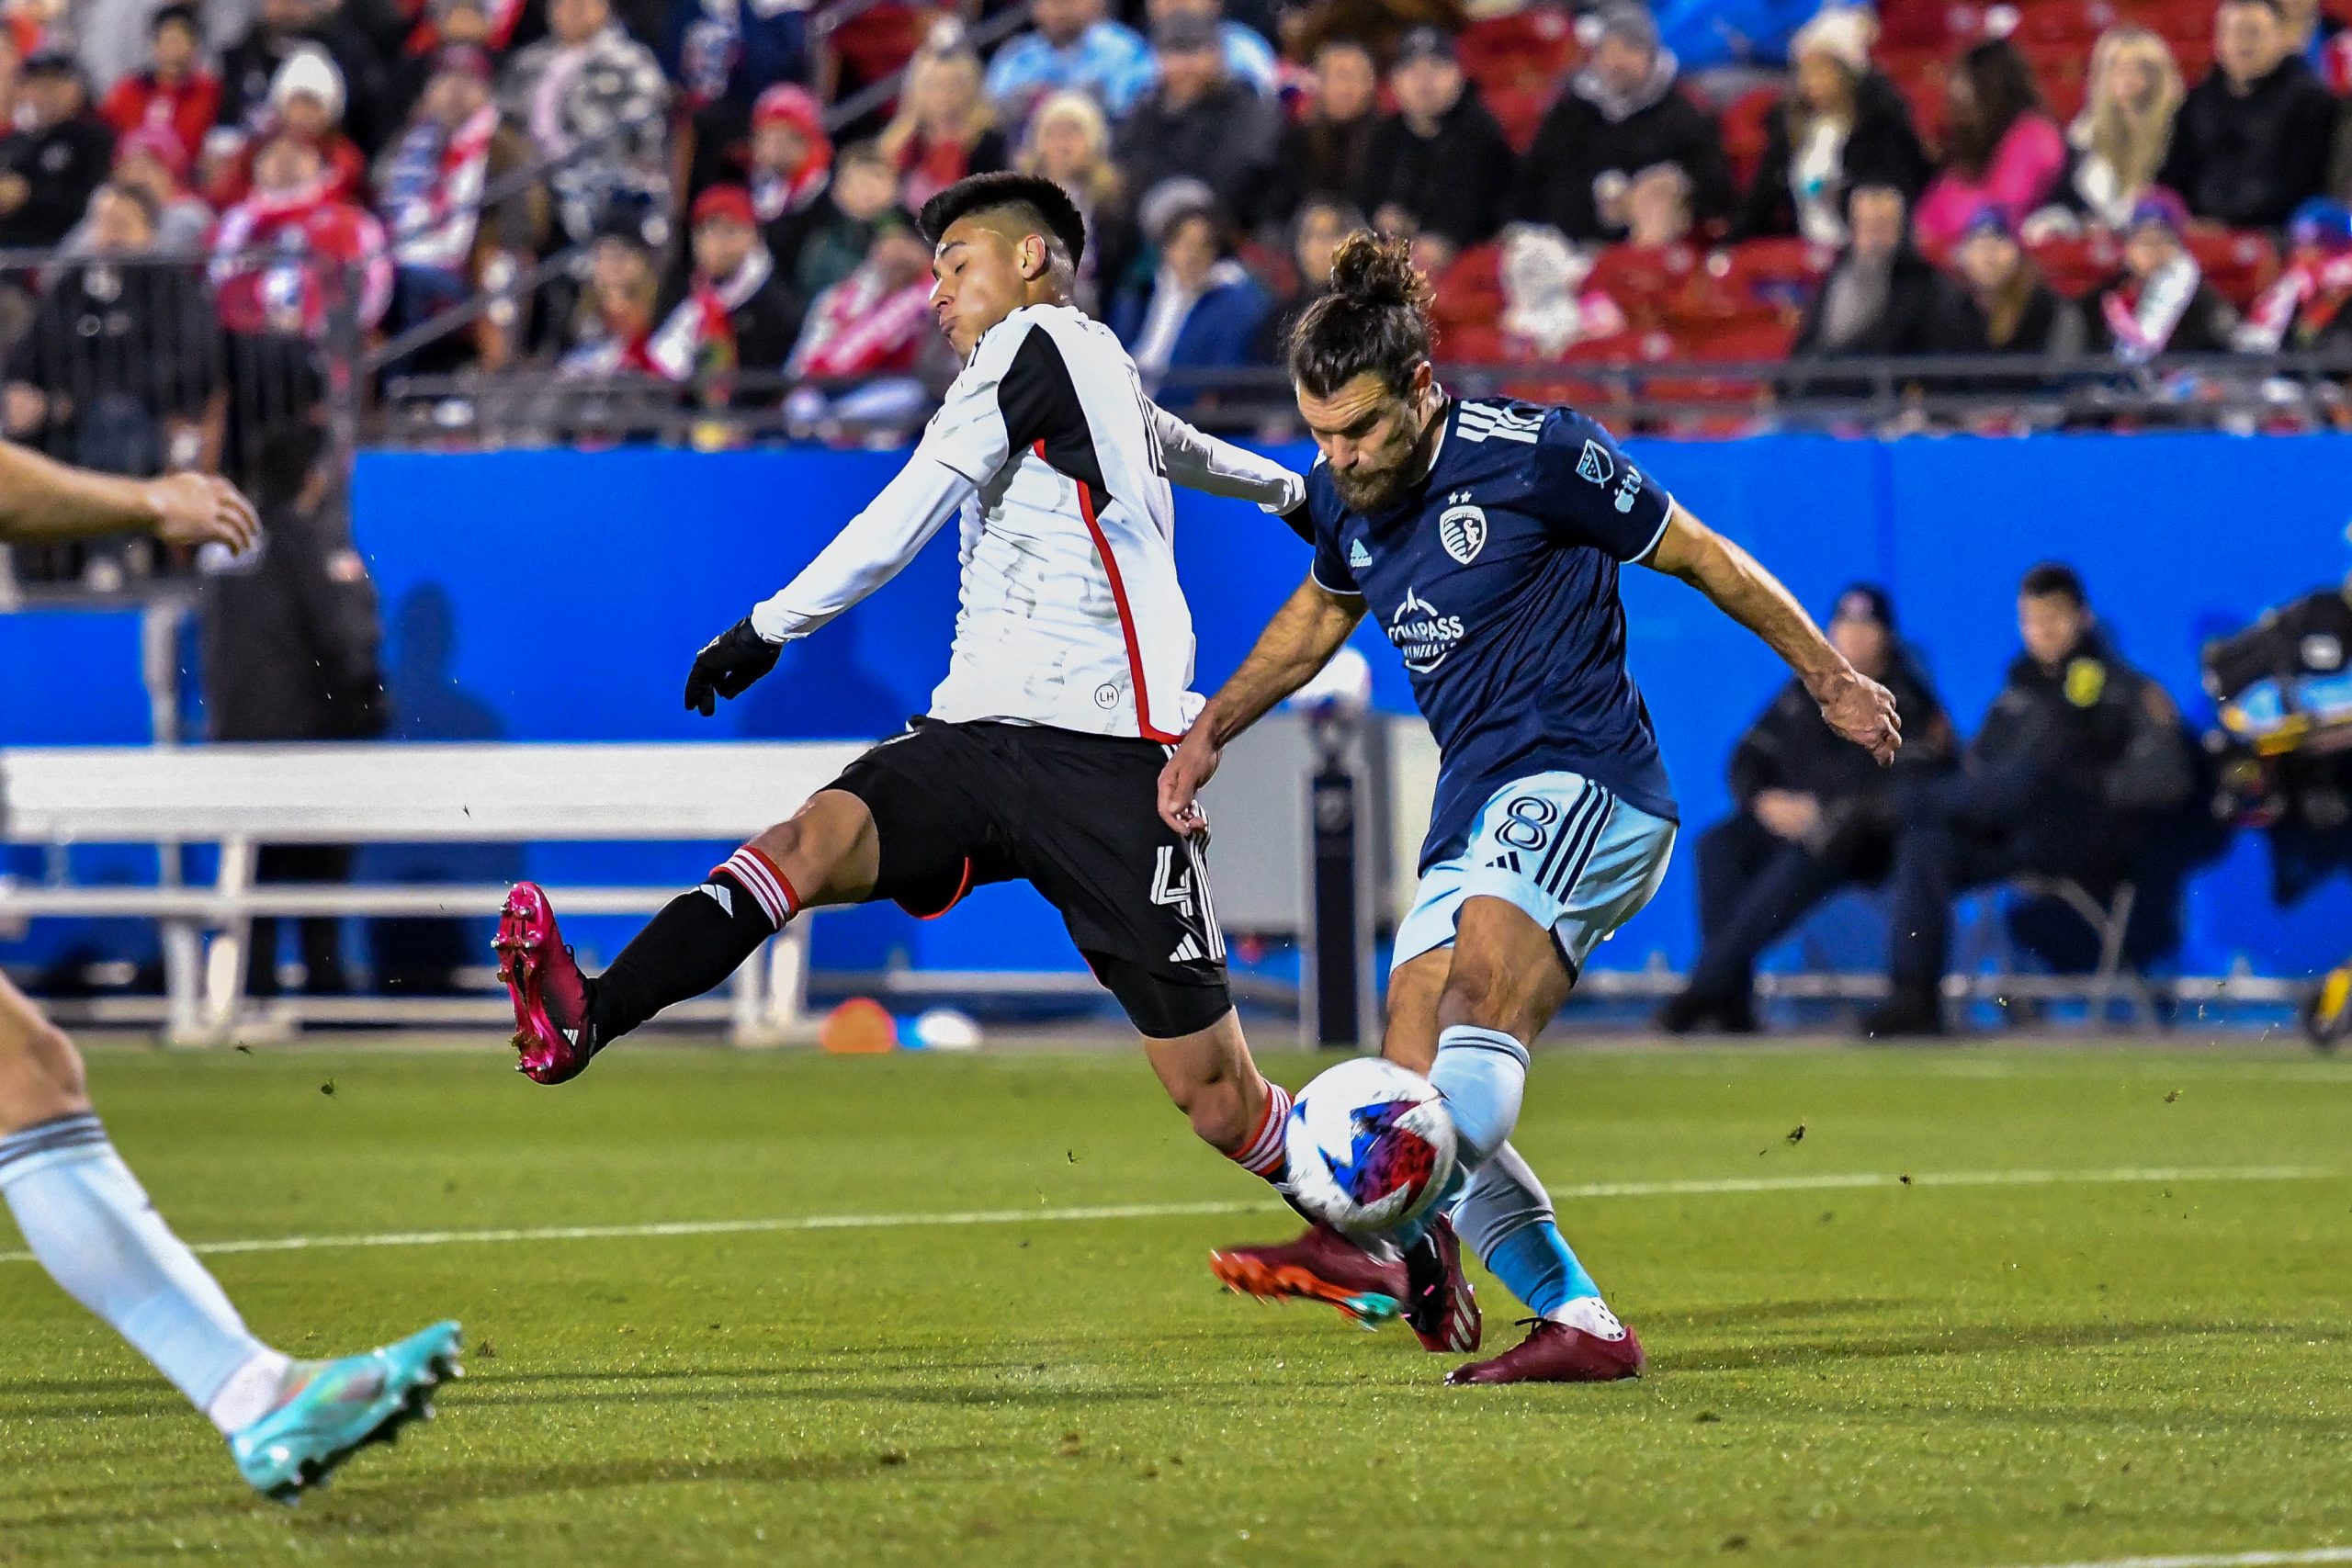 Marco Farfan block Sporting KC defender Graham Zusi’s clearance in the MLS match on Saturday, March 18, 2023, at Toyota Stadium. (Daniel McCullough, 3rd Degree)